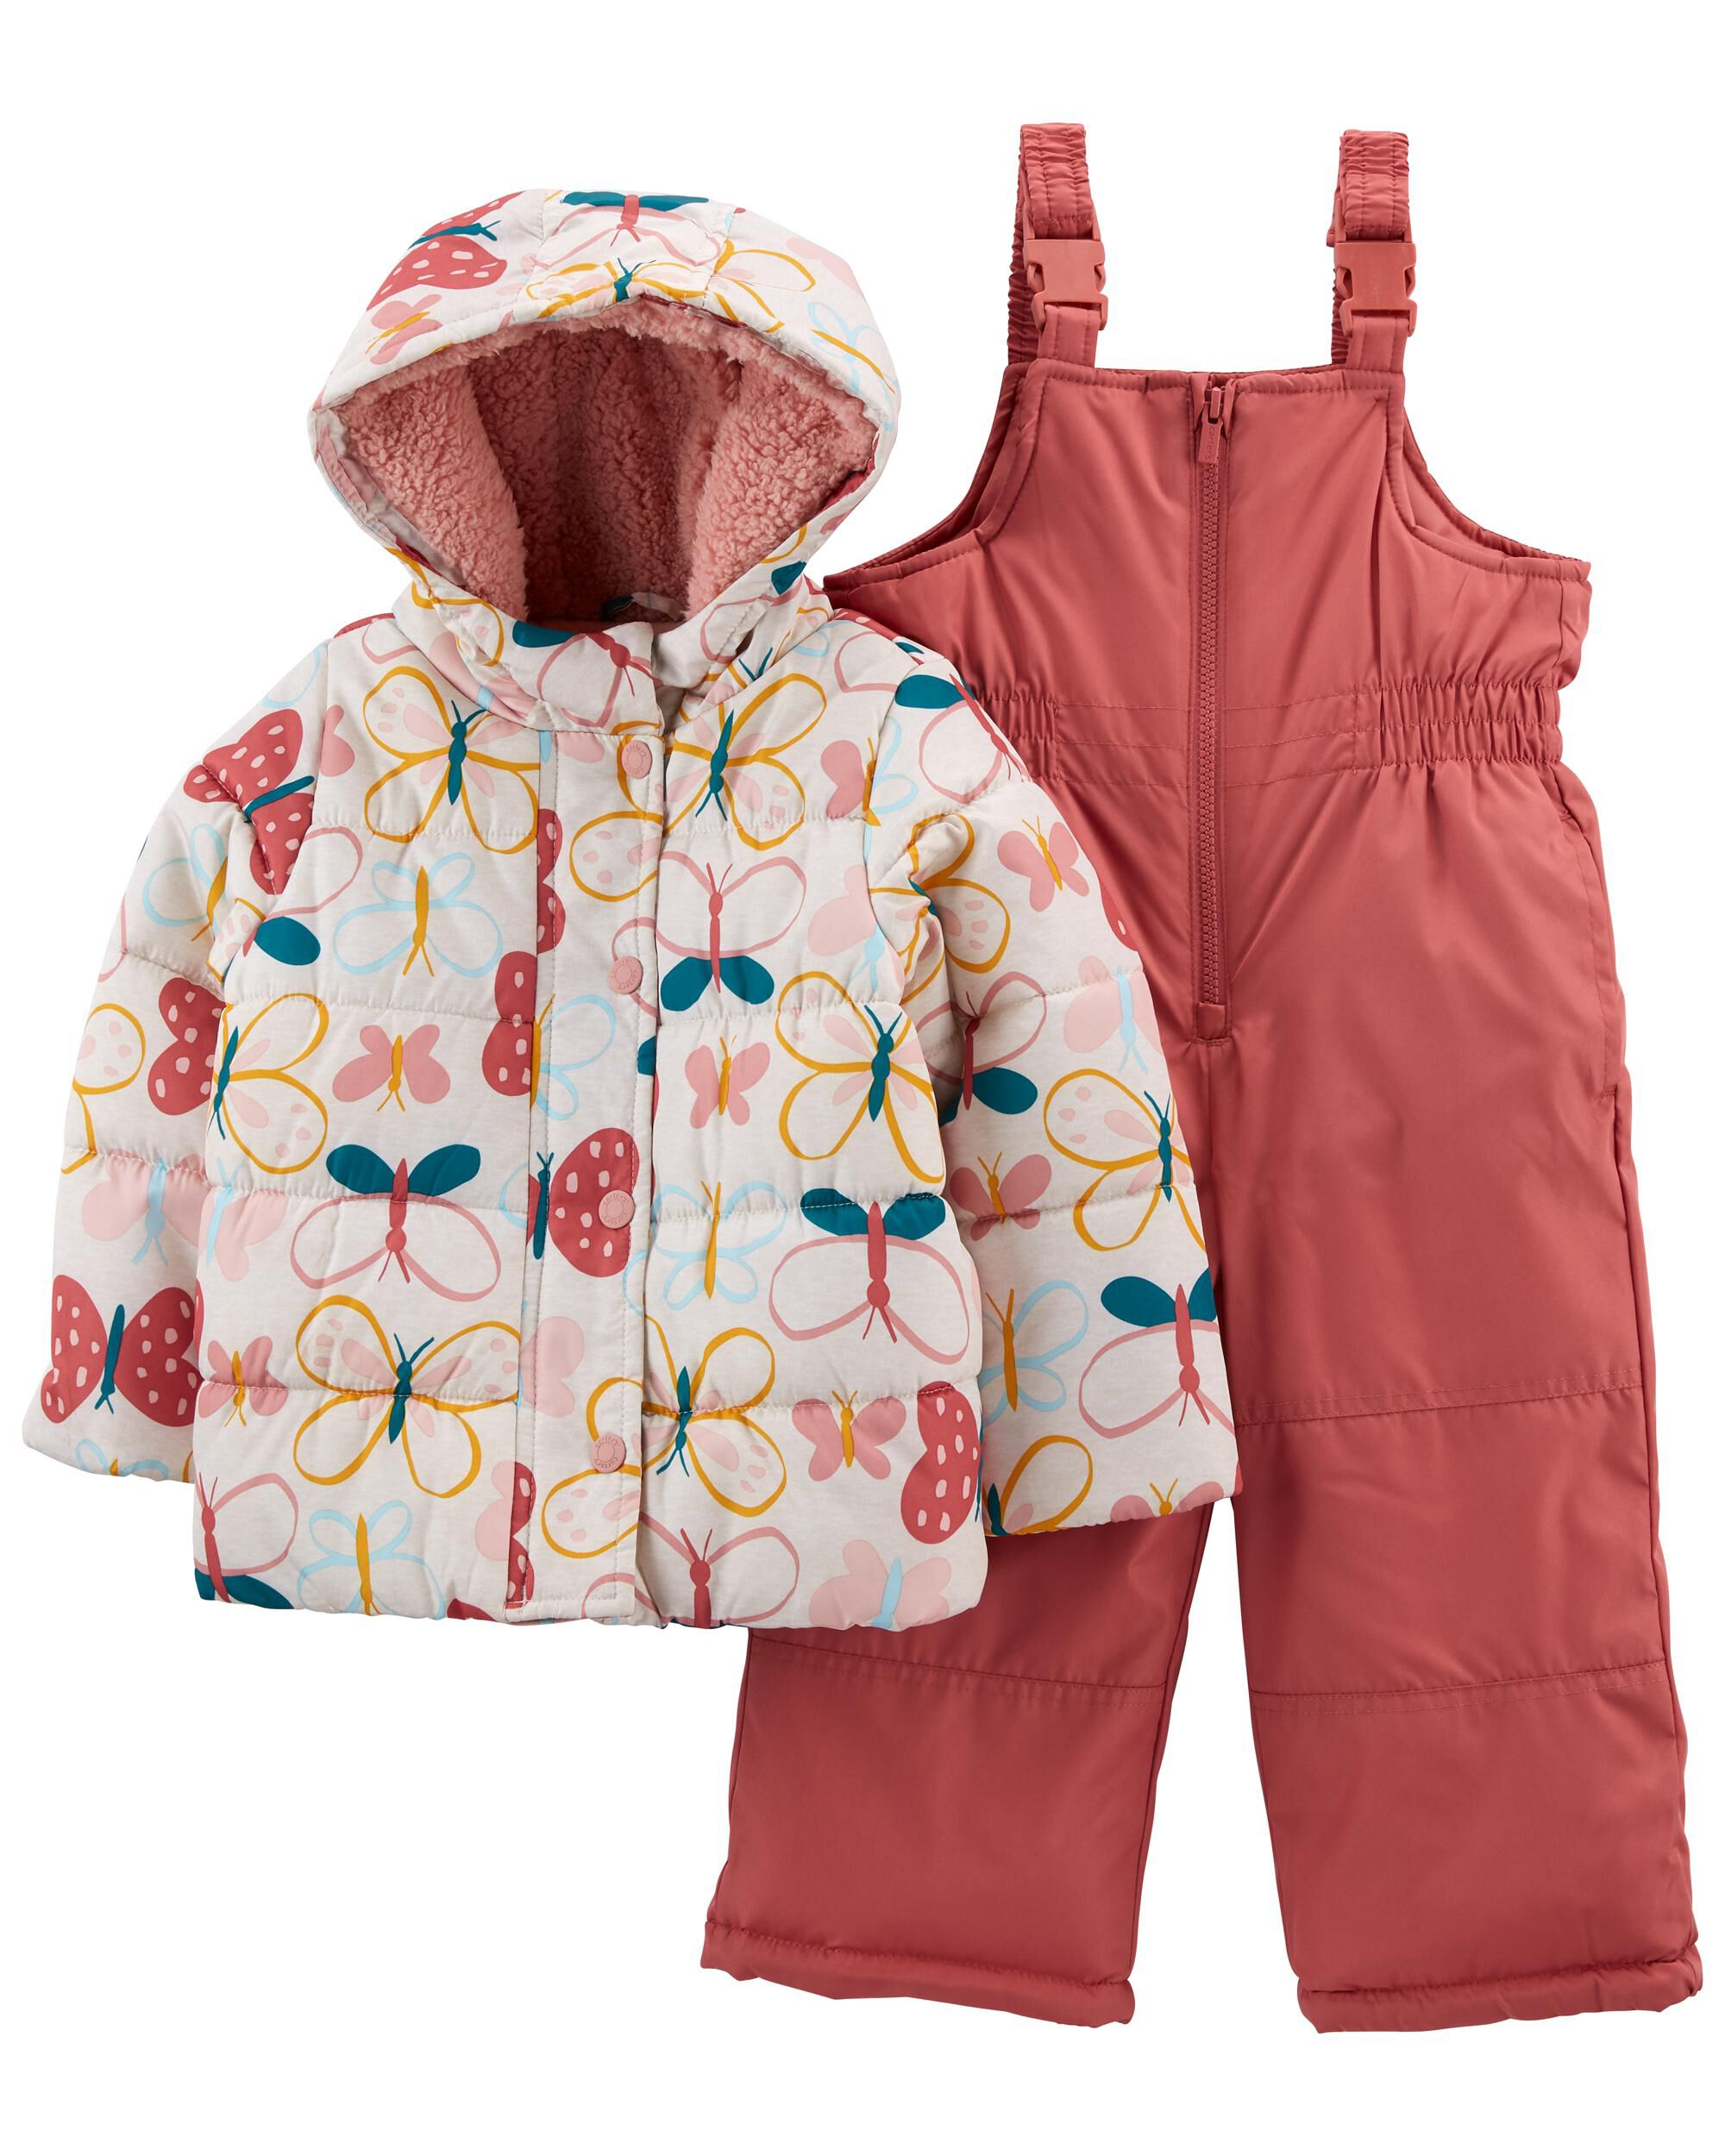 Carter's Girls Pink Kitty 2pc Snowsuit Size 2T 3T 4T 4 5/6 6X 